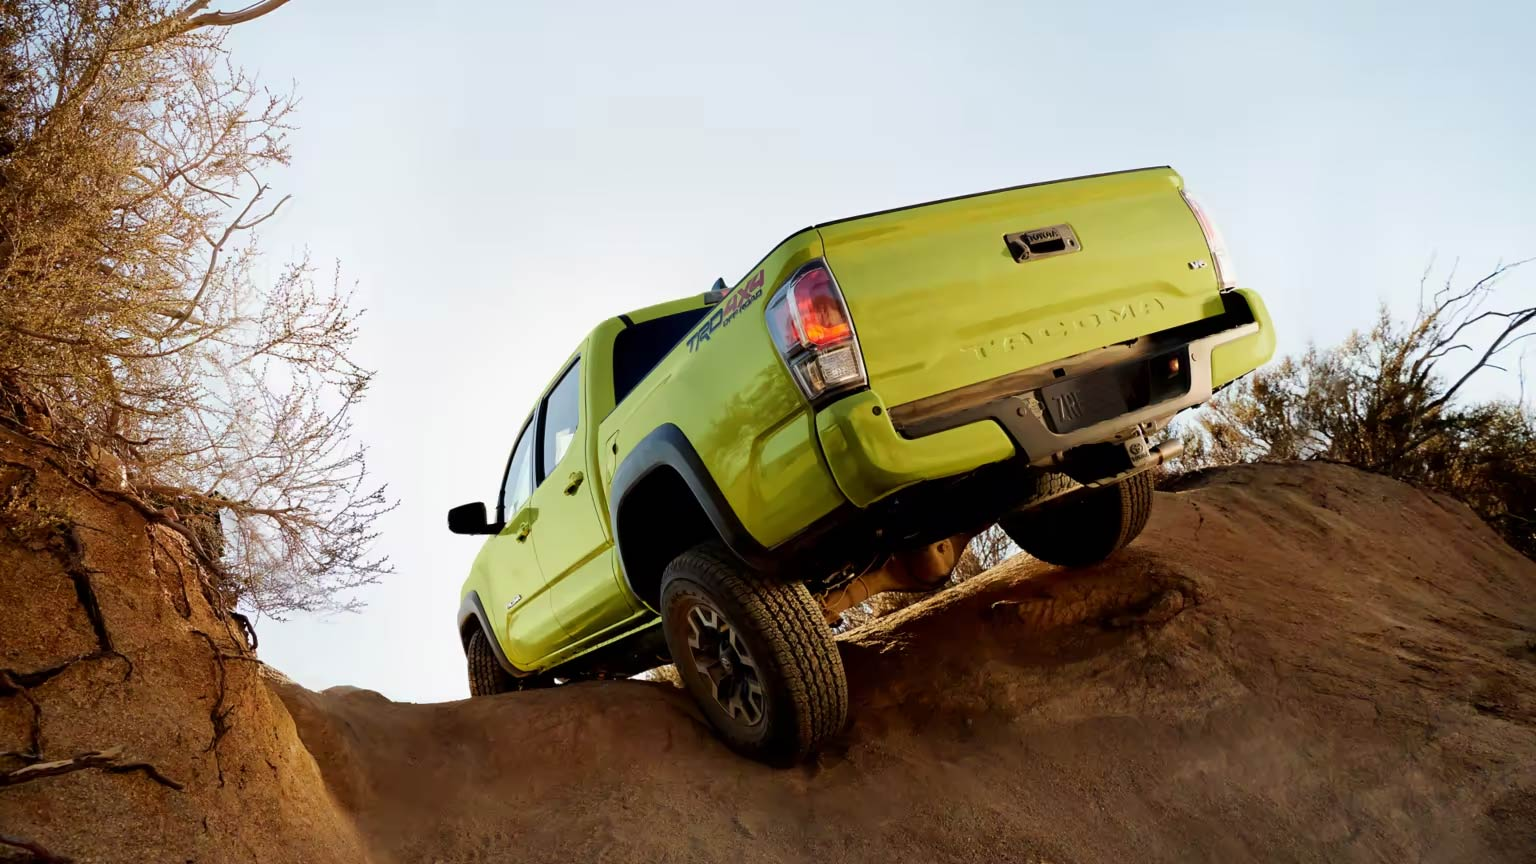 What Makes The Toyota Tacoma A Popular Pick-Up Truck?